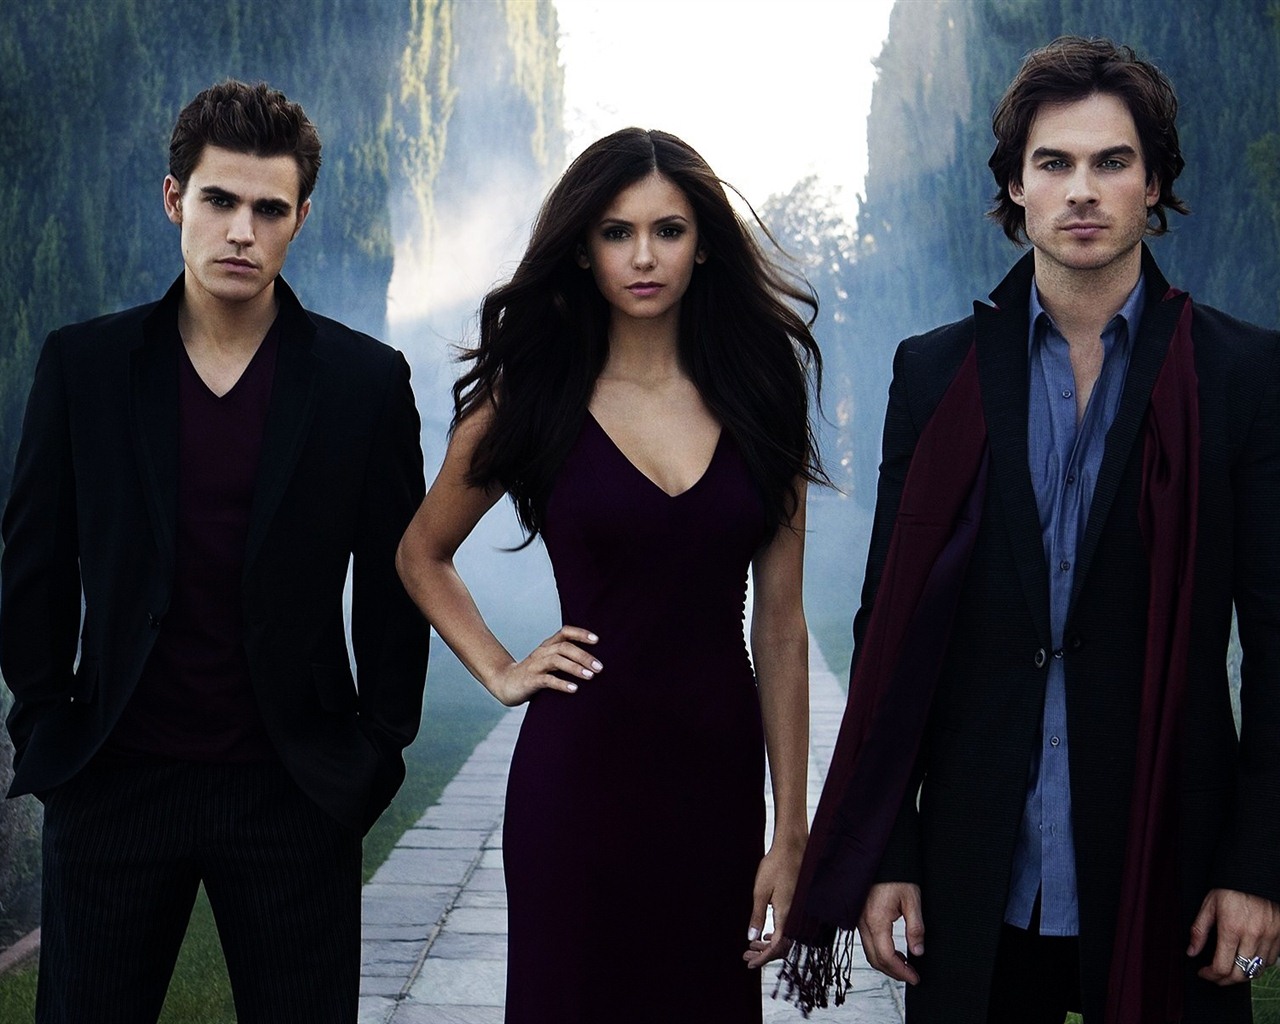 The Vampire Diaries wallpapers HD #6 - 1280x1024